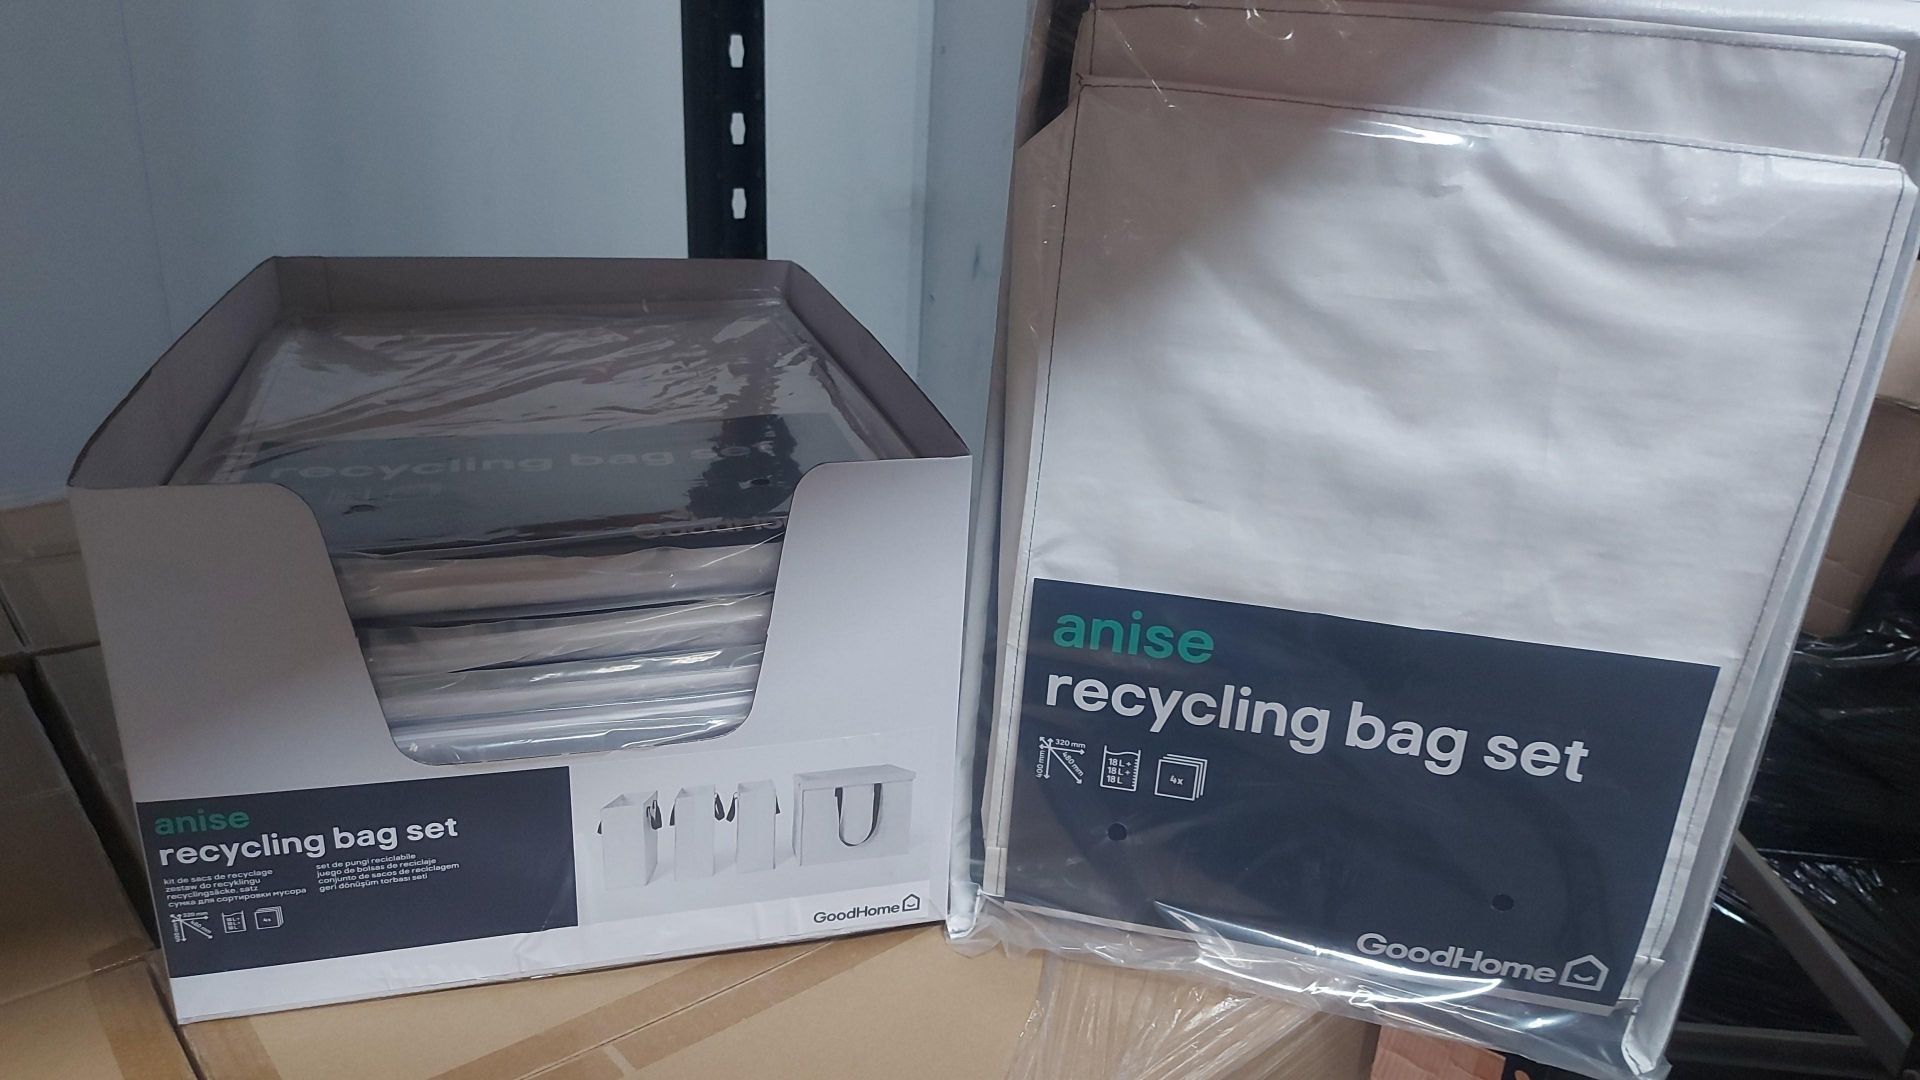 18 X NEW PACKAGED SETS OF 4 NISE RECYCLING BAG SETS. INCLUDES 3 X 18L HEAVY DUTY BAGS AND AN EXTRA - Image 2 of 2